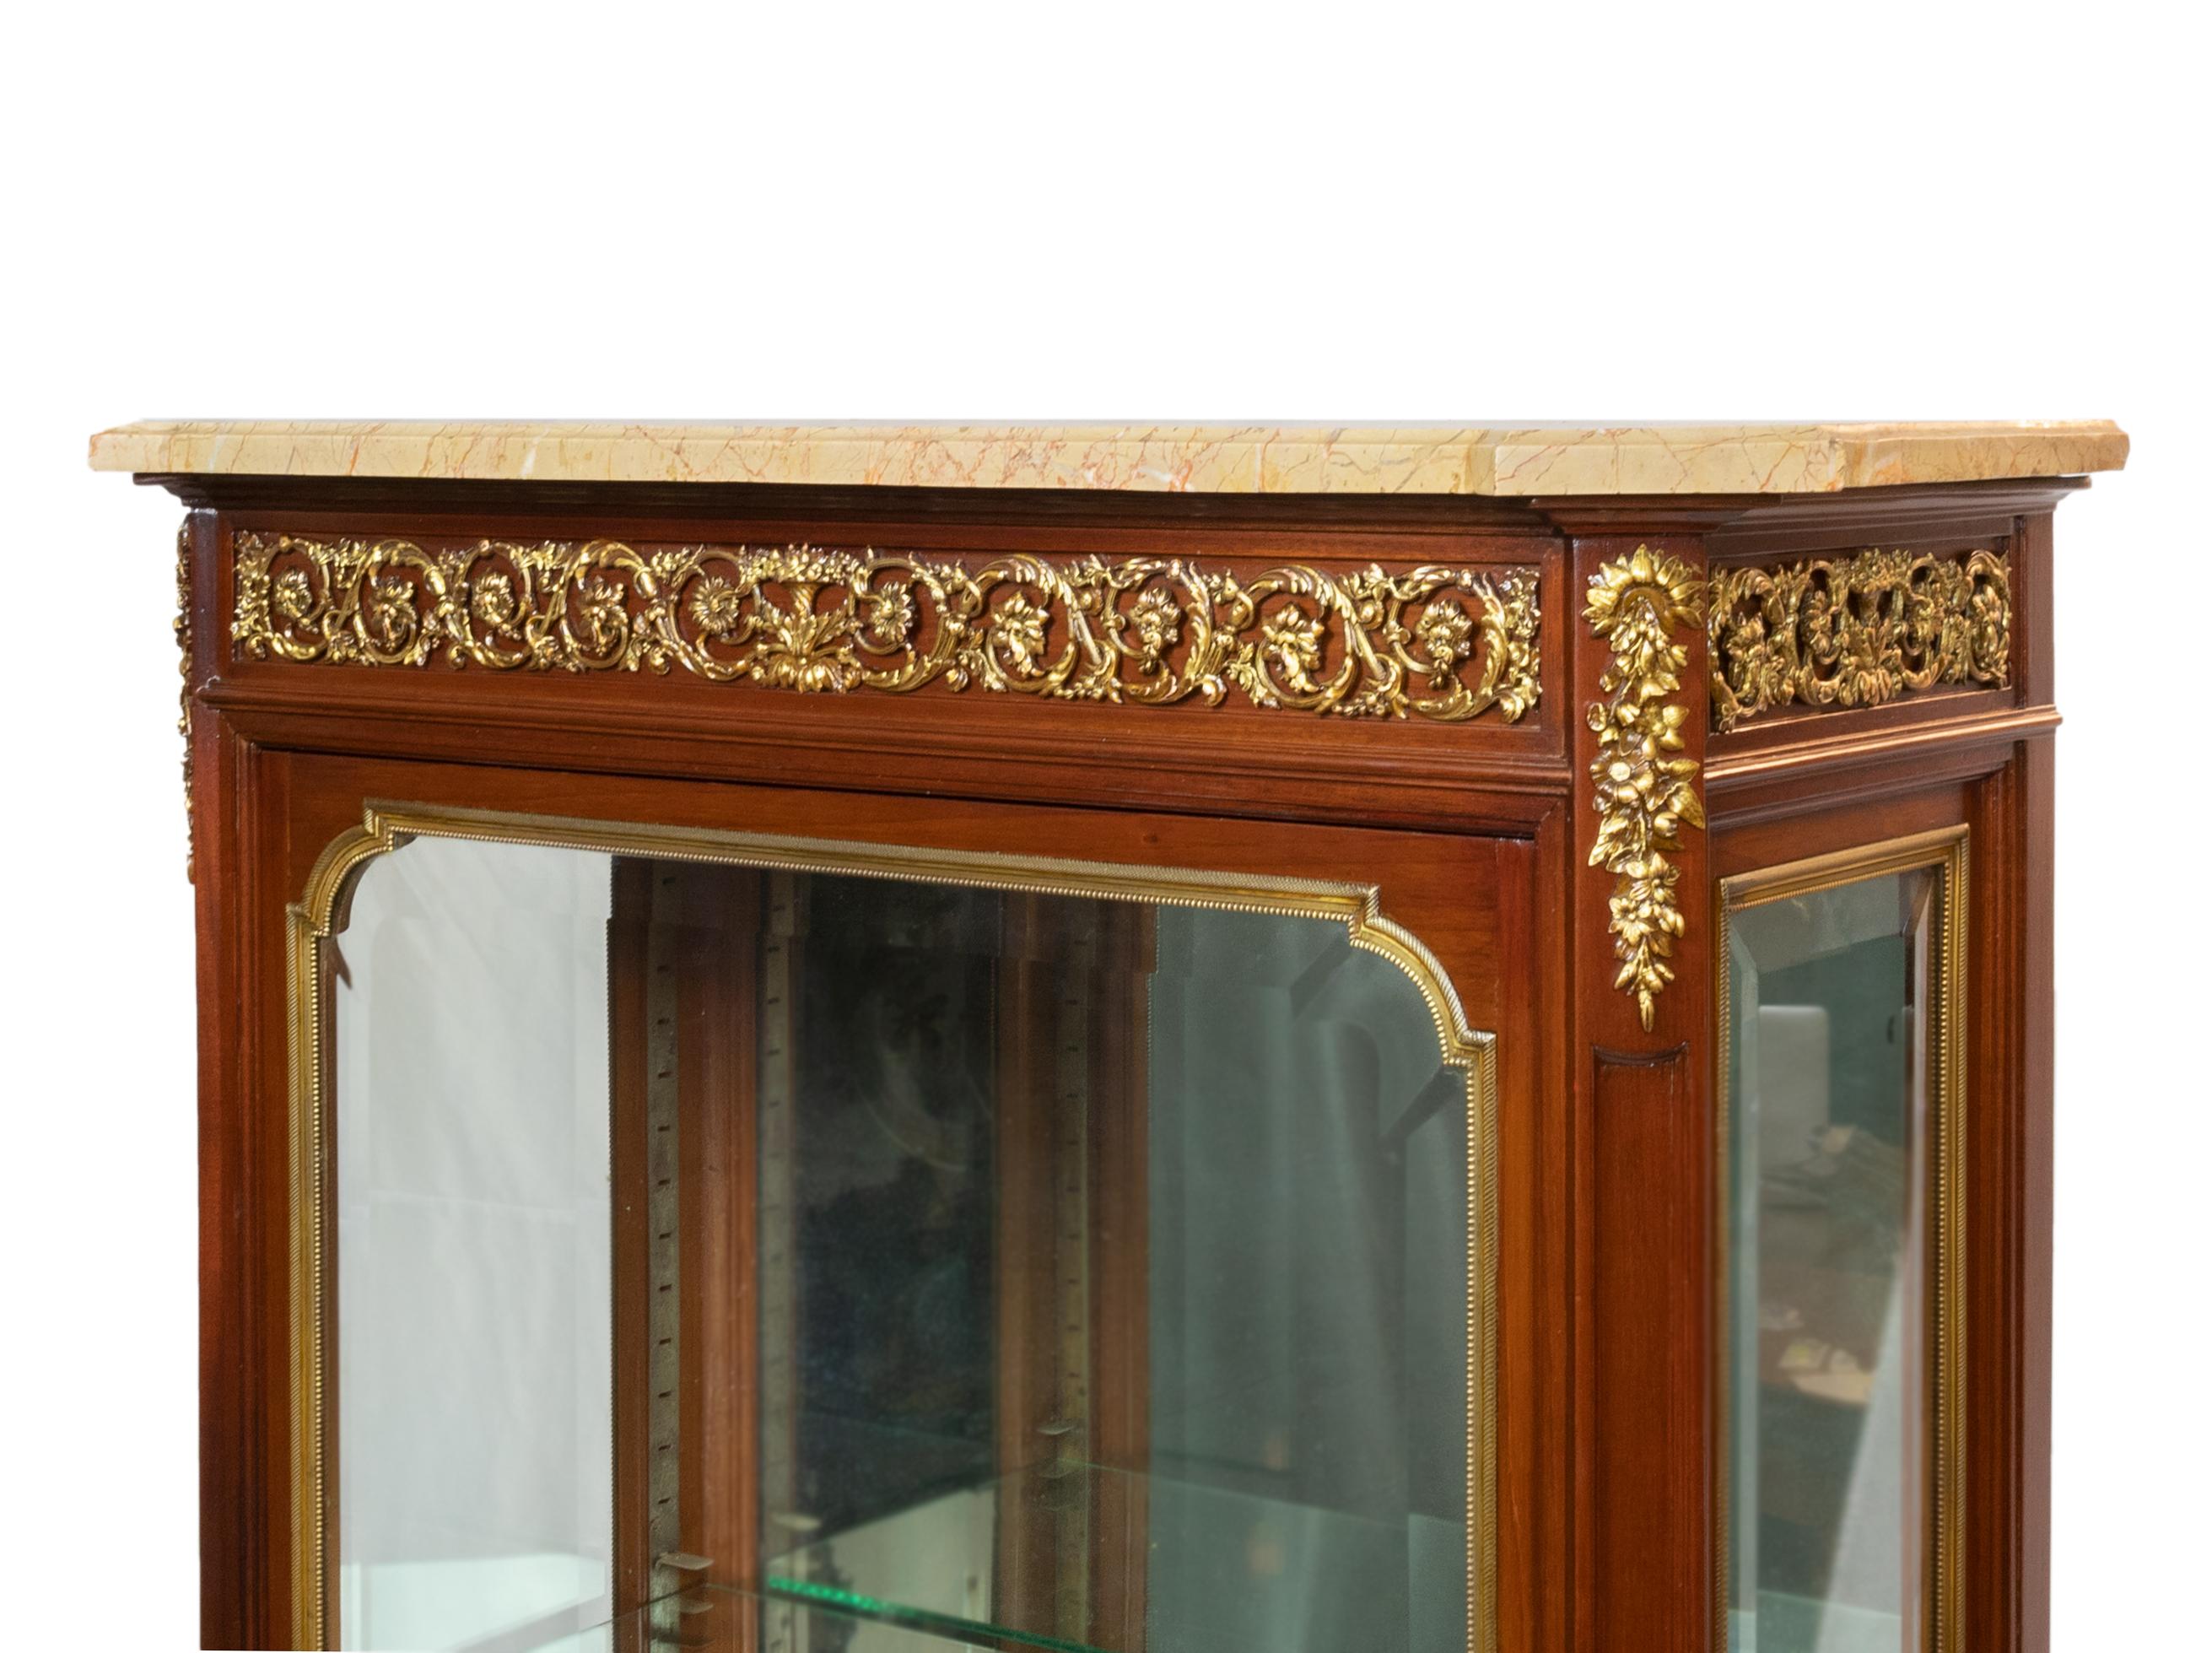 A one-of-a-kind Napoleon III-style showcase, cabinet, or display case for bijouterie and jewels. Interior features a glass bottom, translucent glass shelves, corniced top, Cuba mahogany, marquetry, stamped gilded bronze, and a marble top.